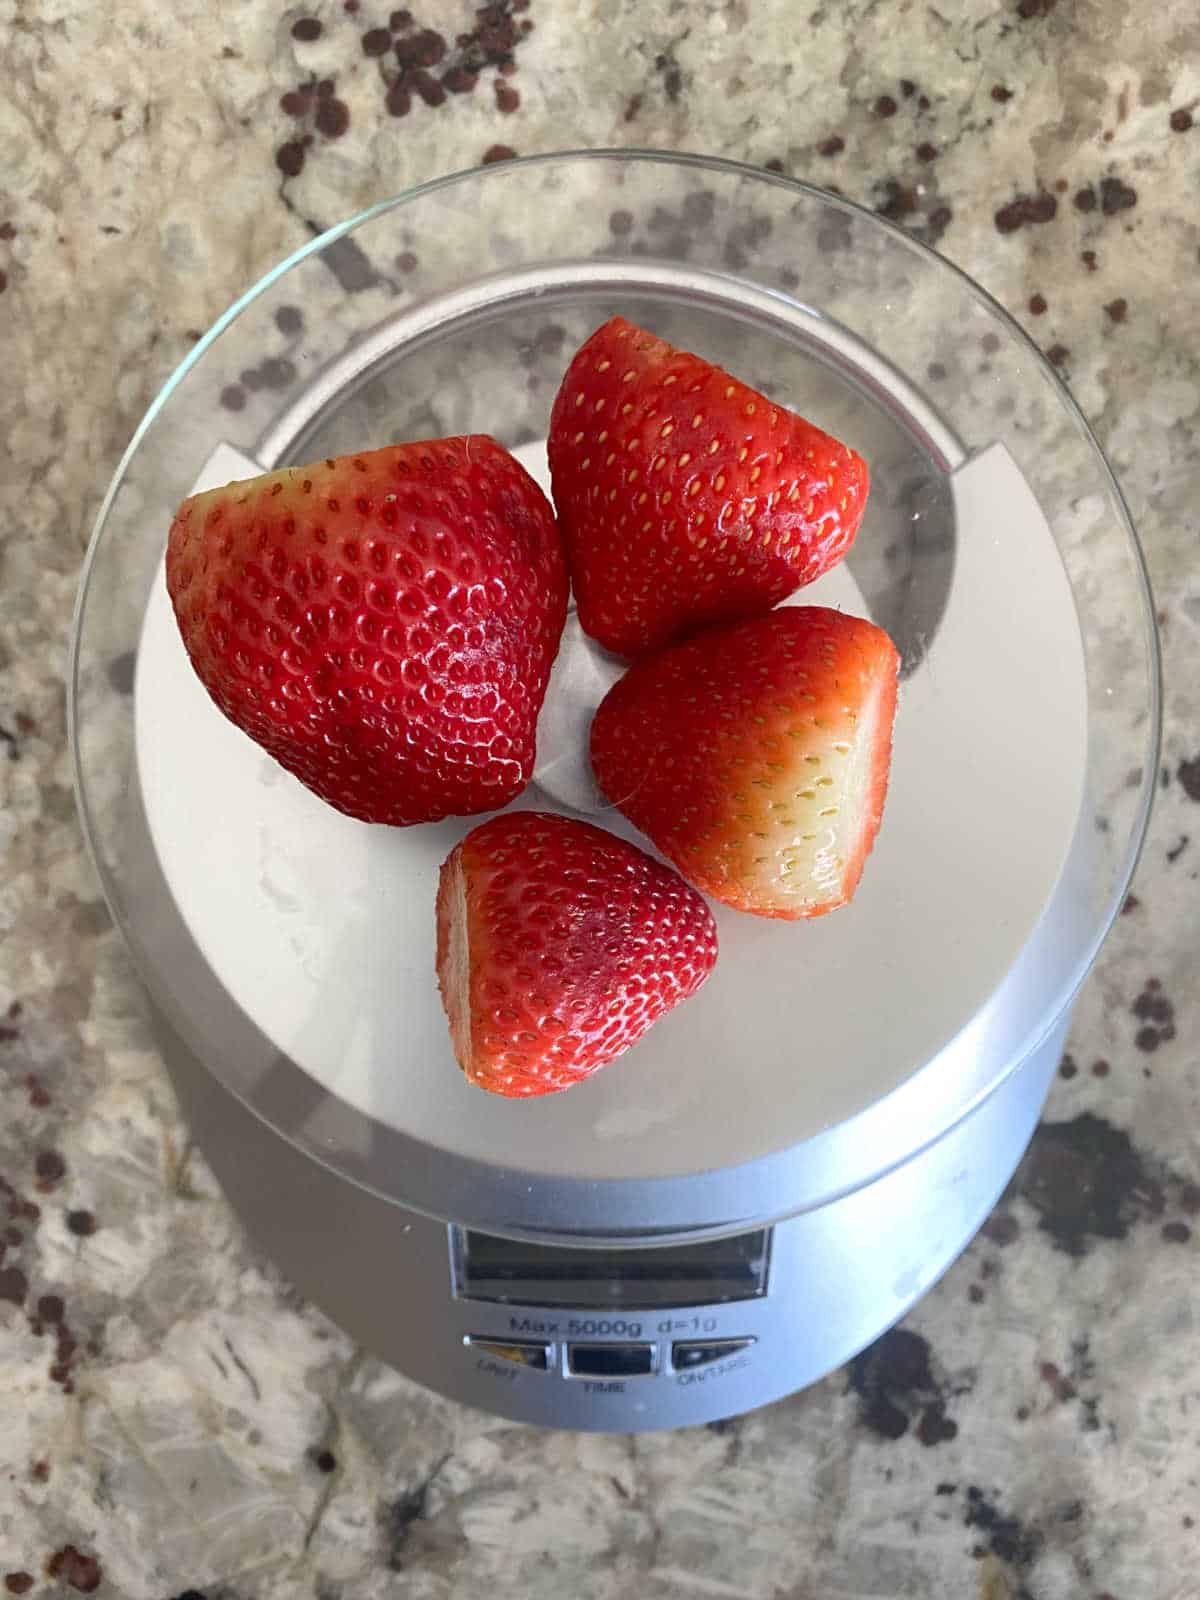 strawberries on a scale.